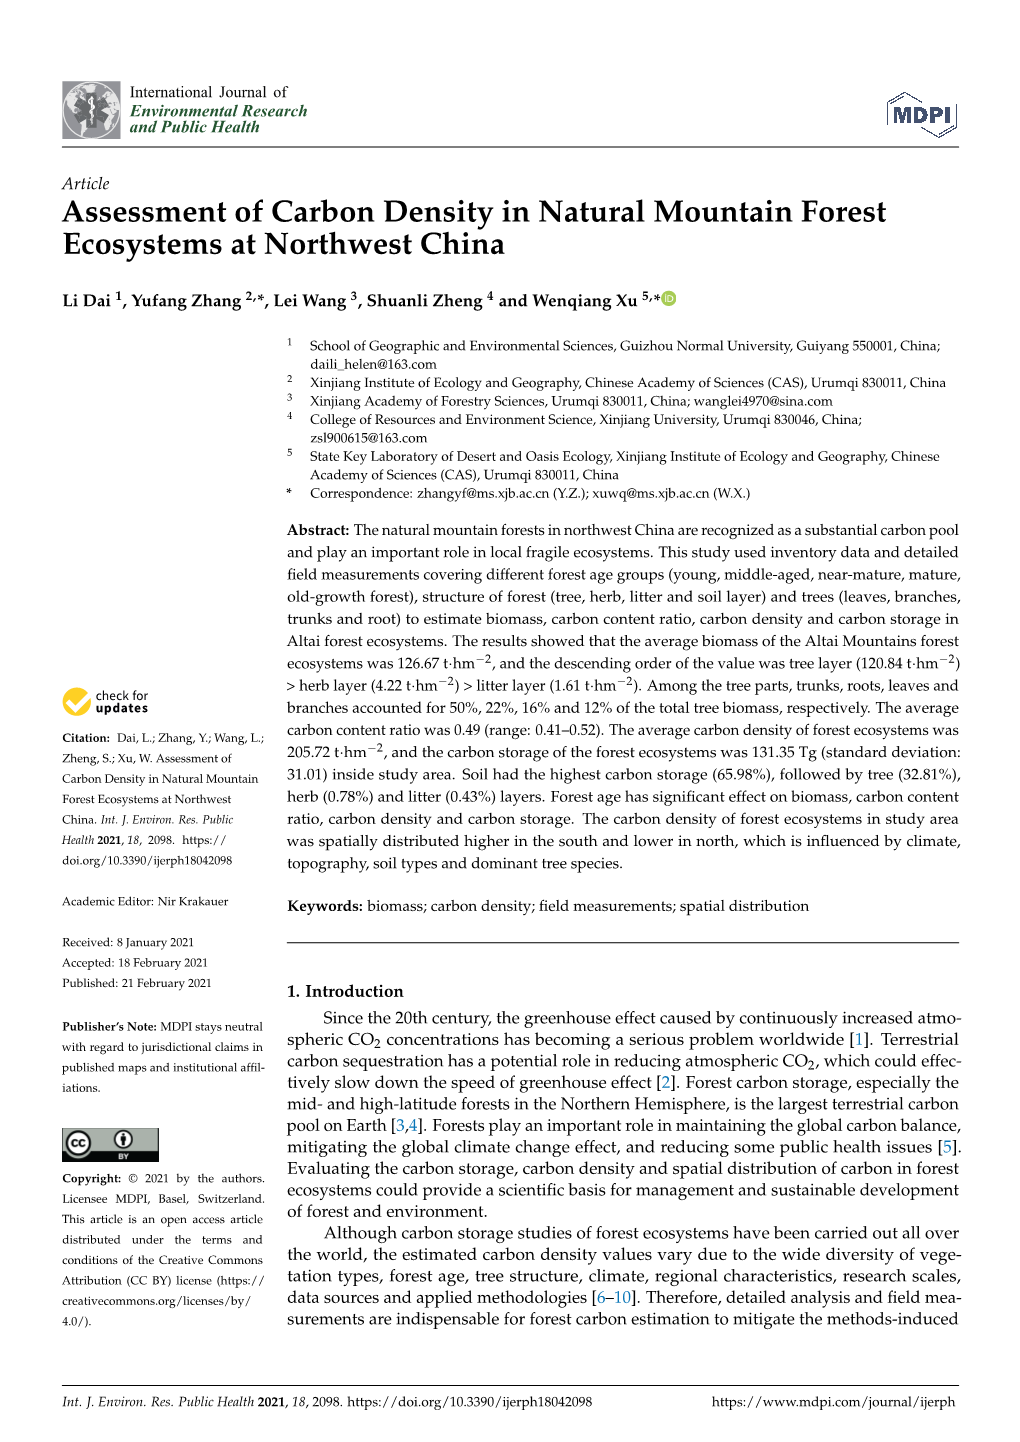 Assessment of Carbon Density in Natural Mountain Forest Ecosystems at Northwest China